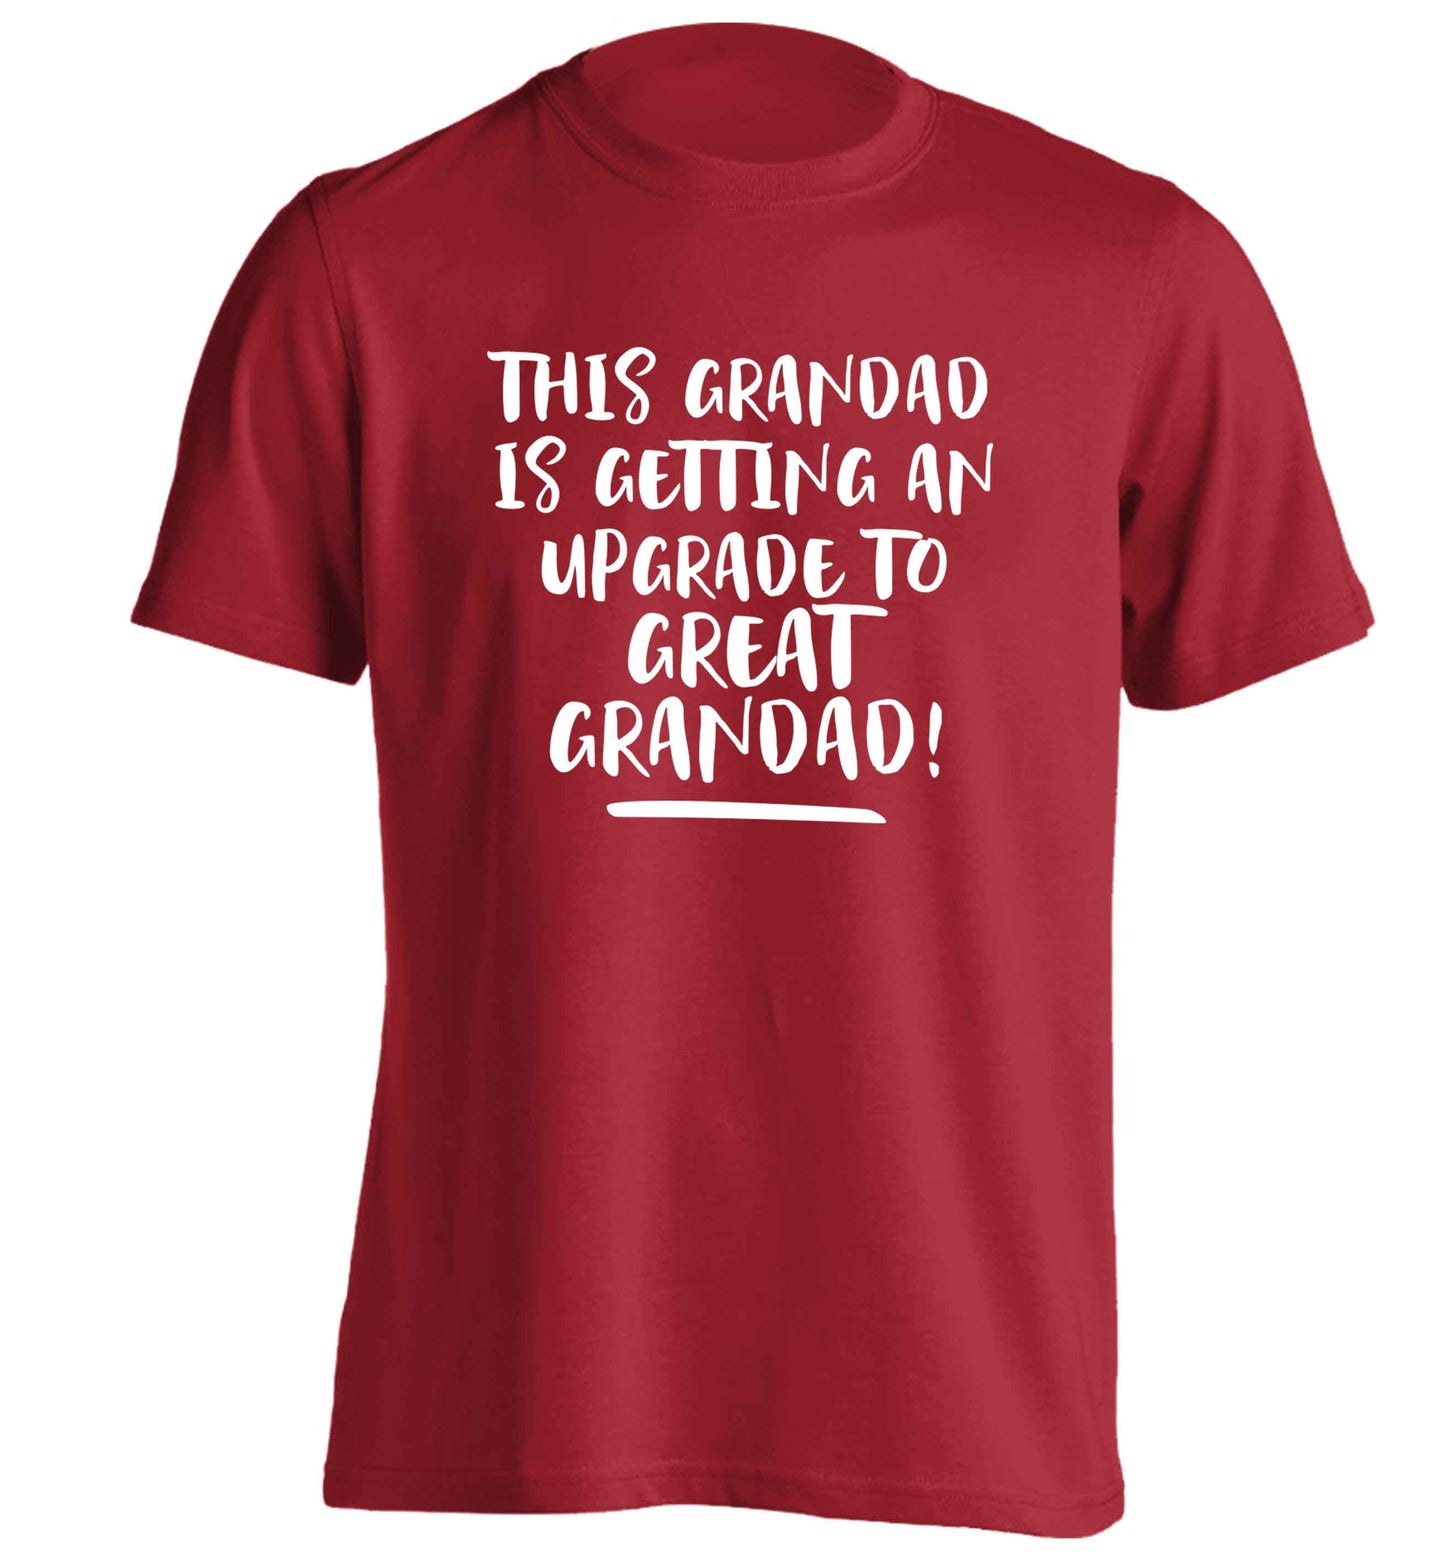 This grandad is getting an upgrade to great grandad! adults unisex red Tshirt 2XL